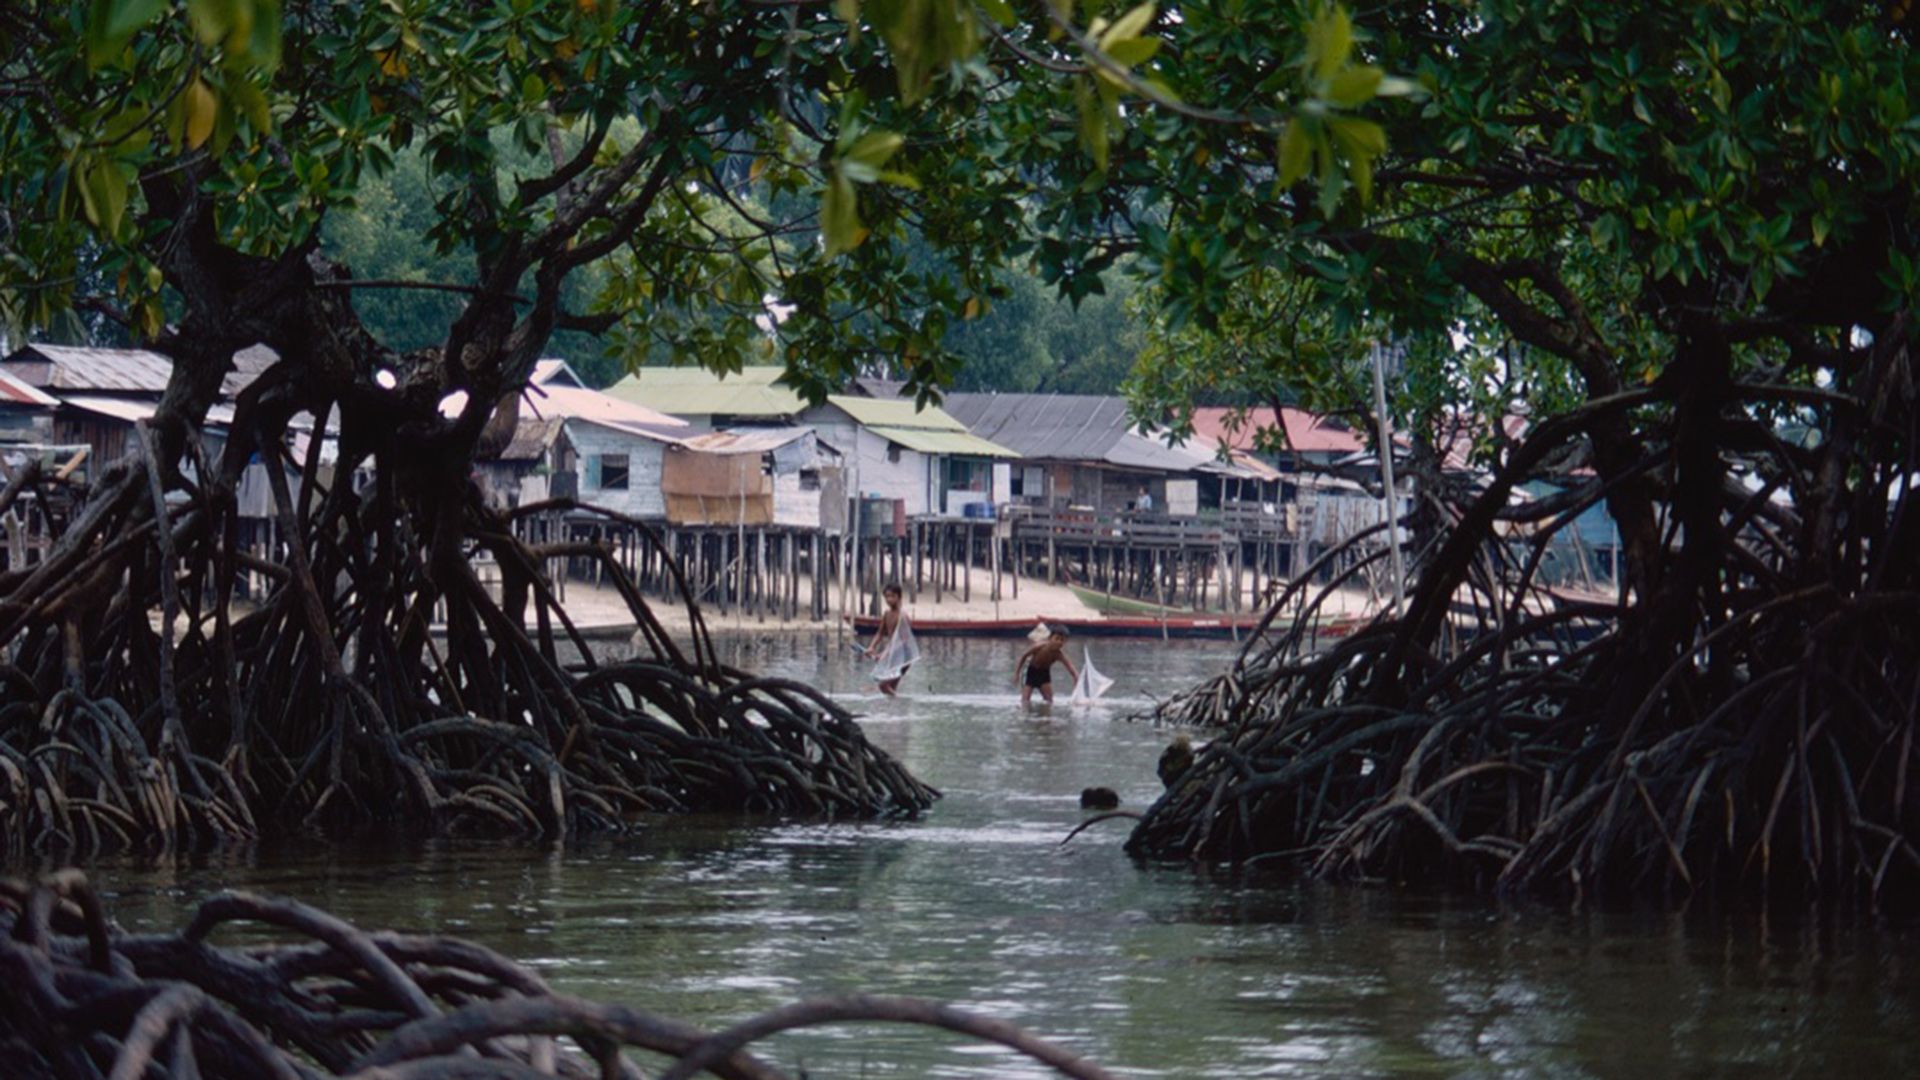 Children playing with their model boats, known as jongs, in shallow water in Pulau Sudong, part of the Southern Islands, in the 1970s.